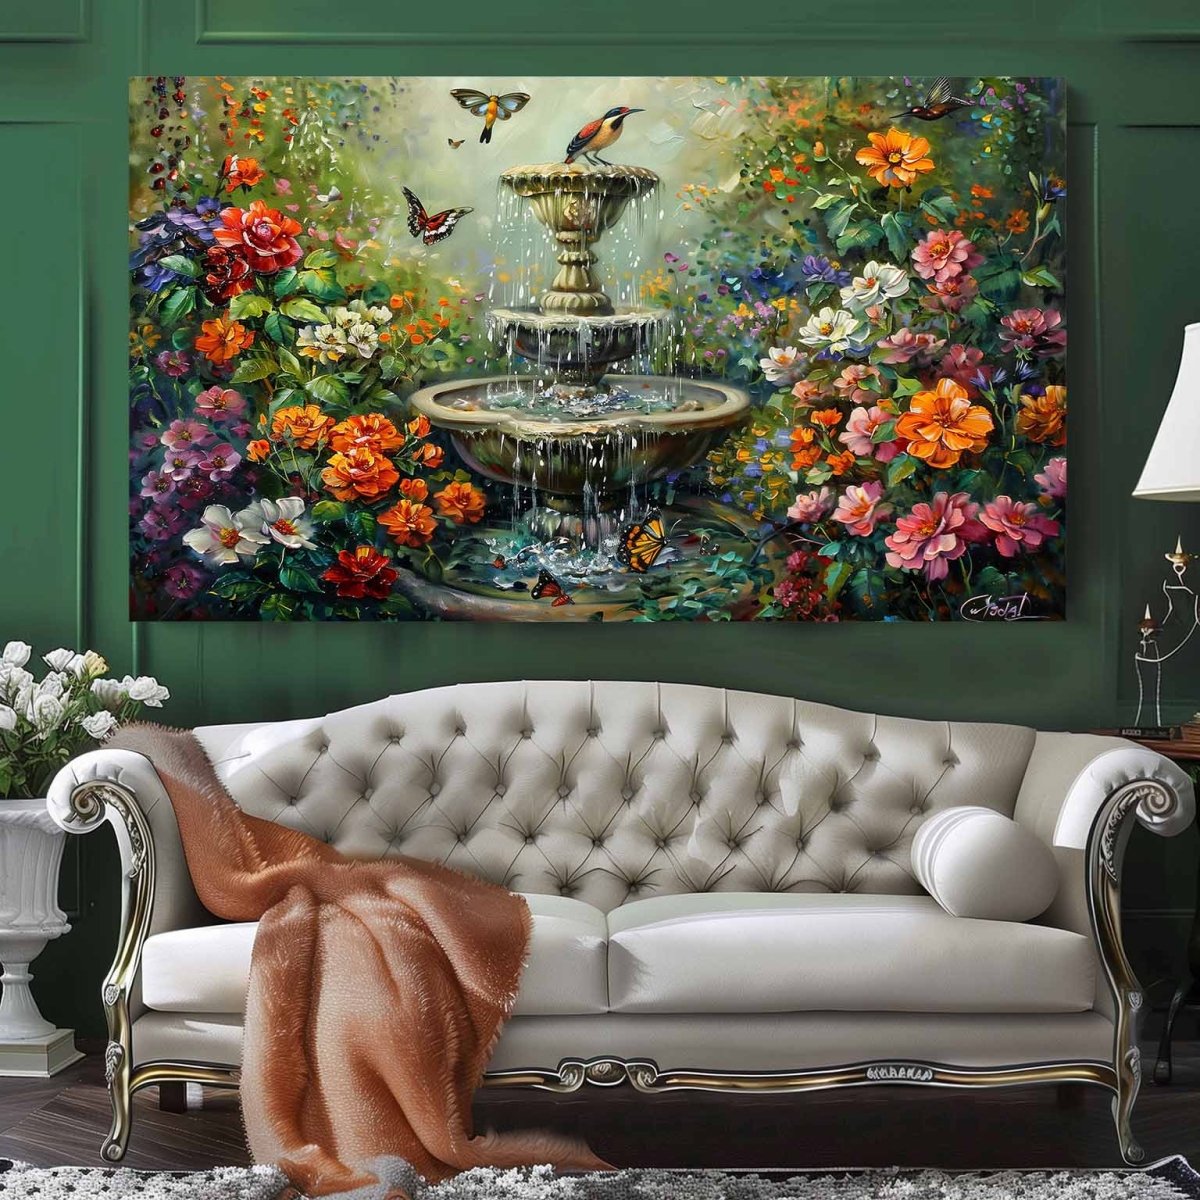 The Butterfly Ballet by the Fountain Canvas Wall Painting (36 x 24 Inches)